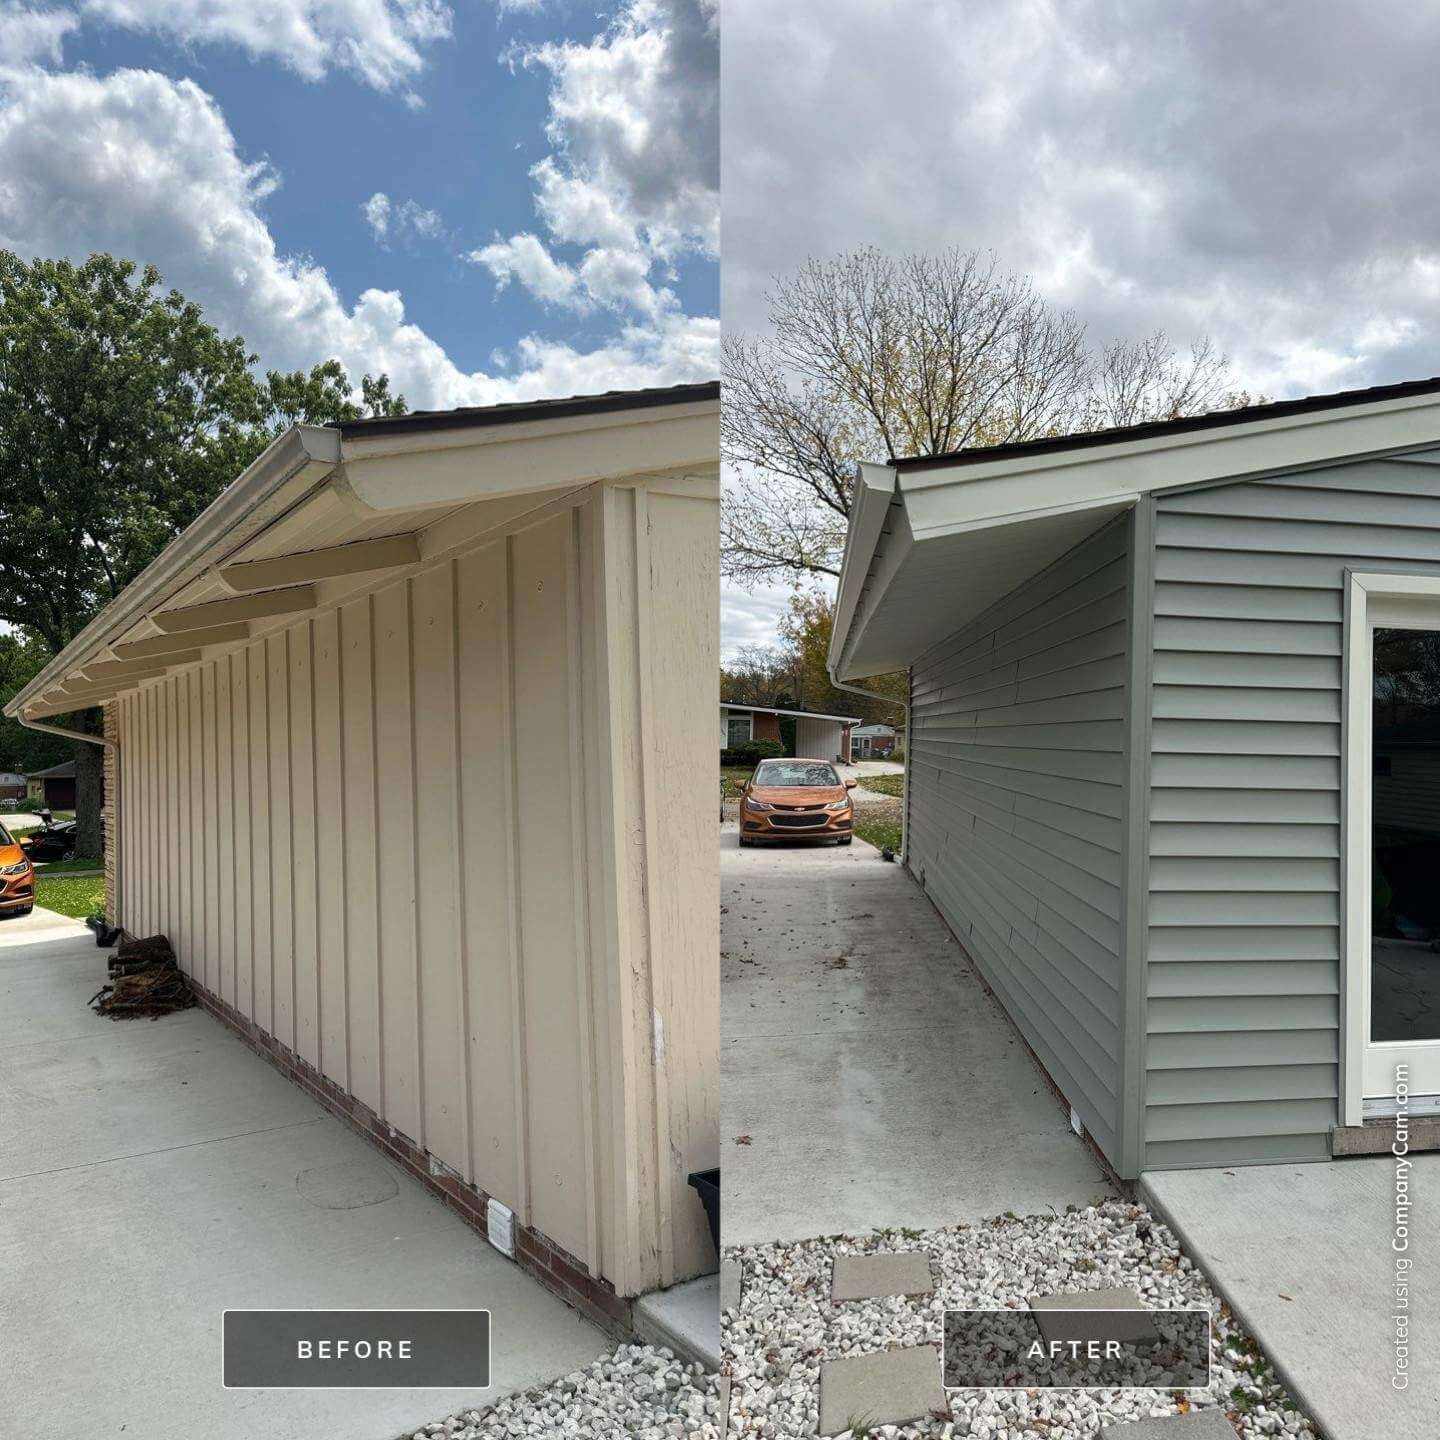 Before and after photos of a home with new gutters and siding